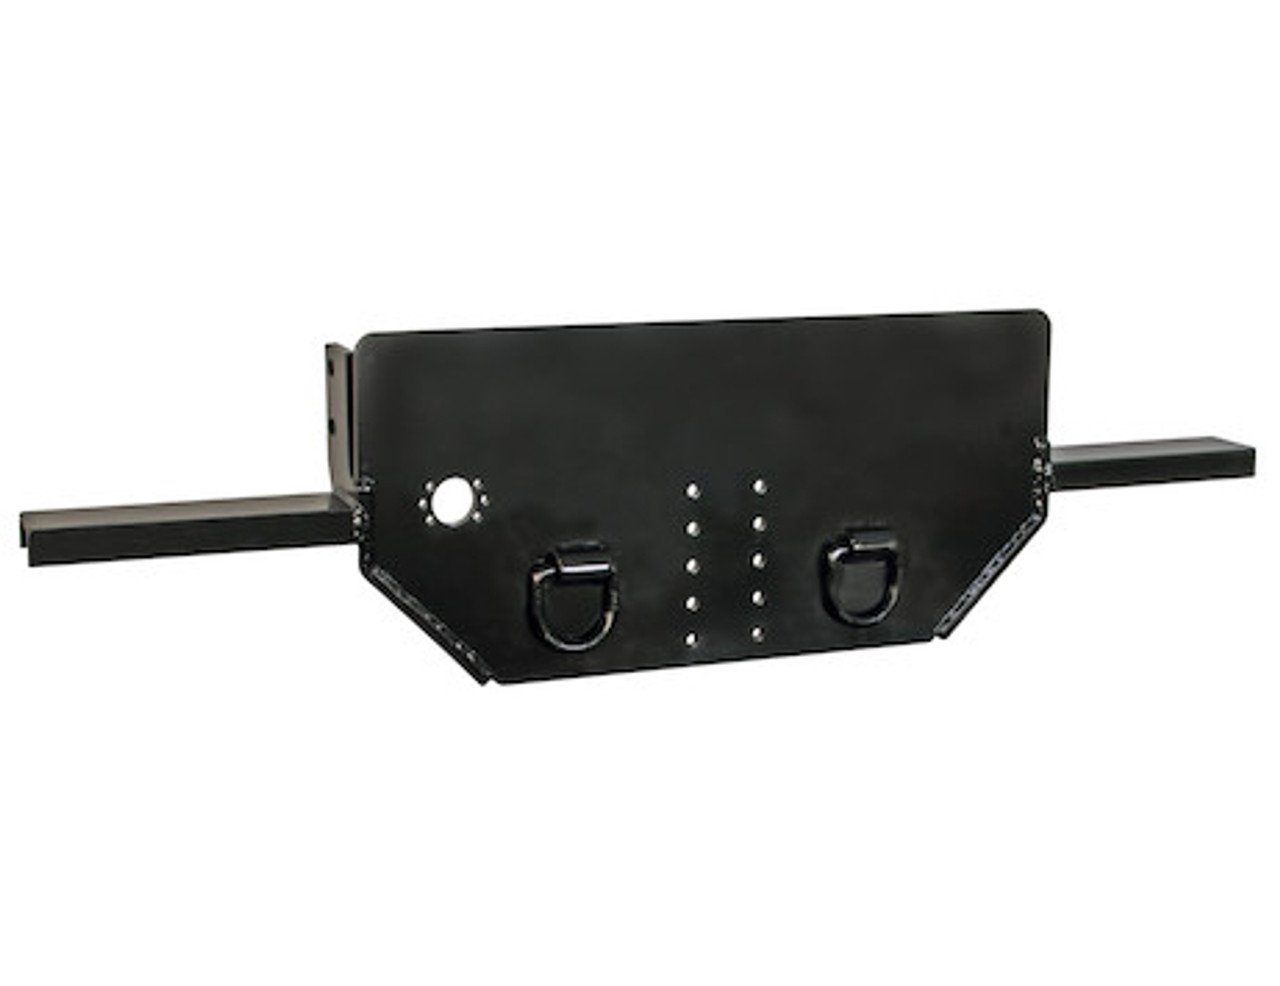 1809039 --- Hitch Plate with Pintle Hook Mounting Holes for Chevy/GMC 4500/5500; 4x4 with Side Channel